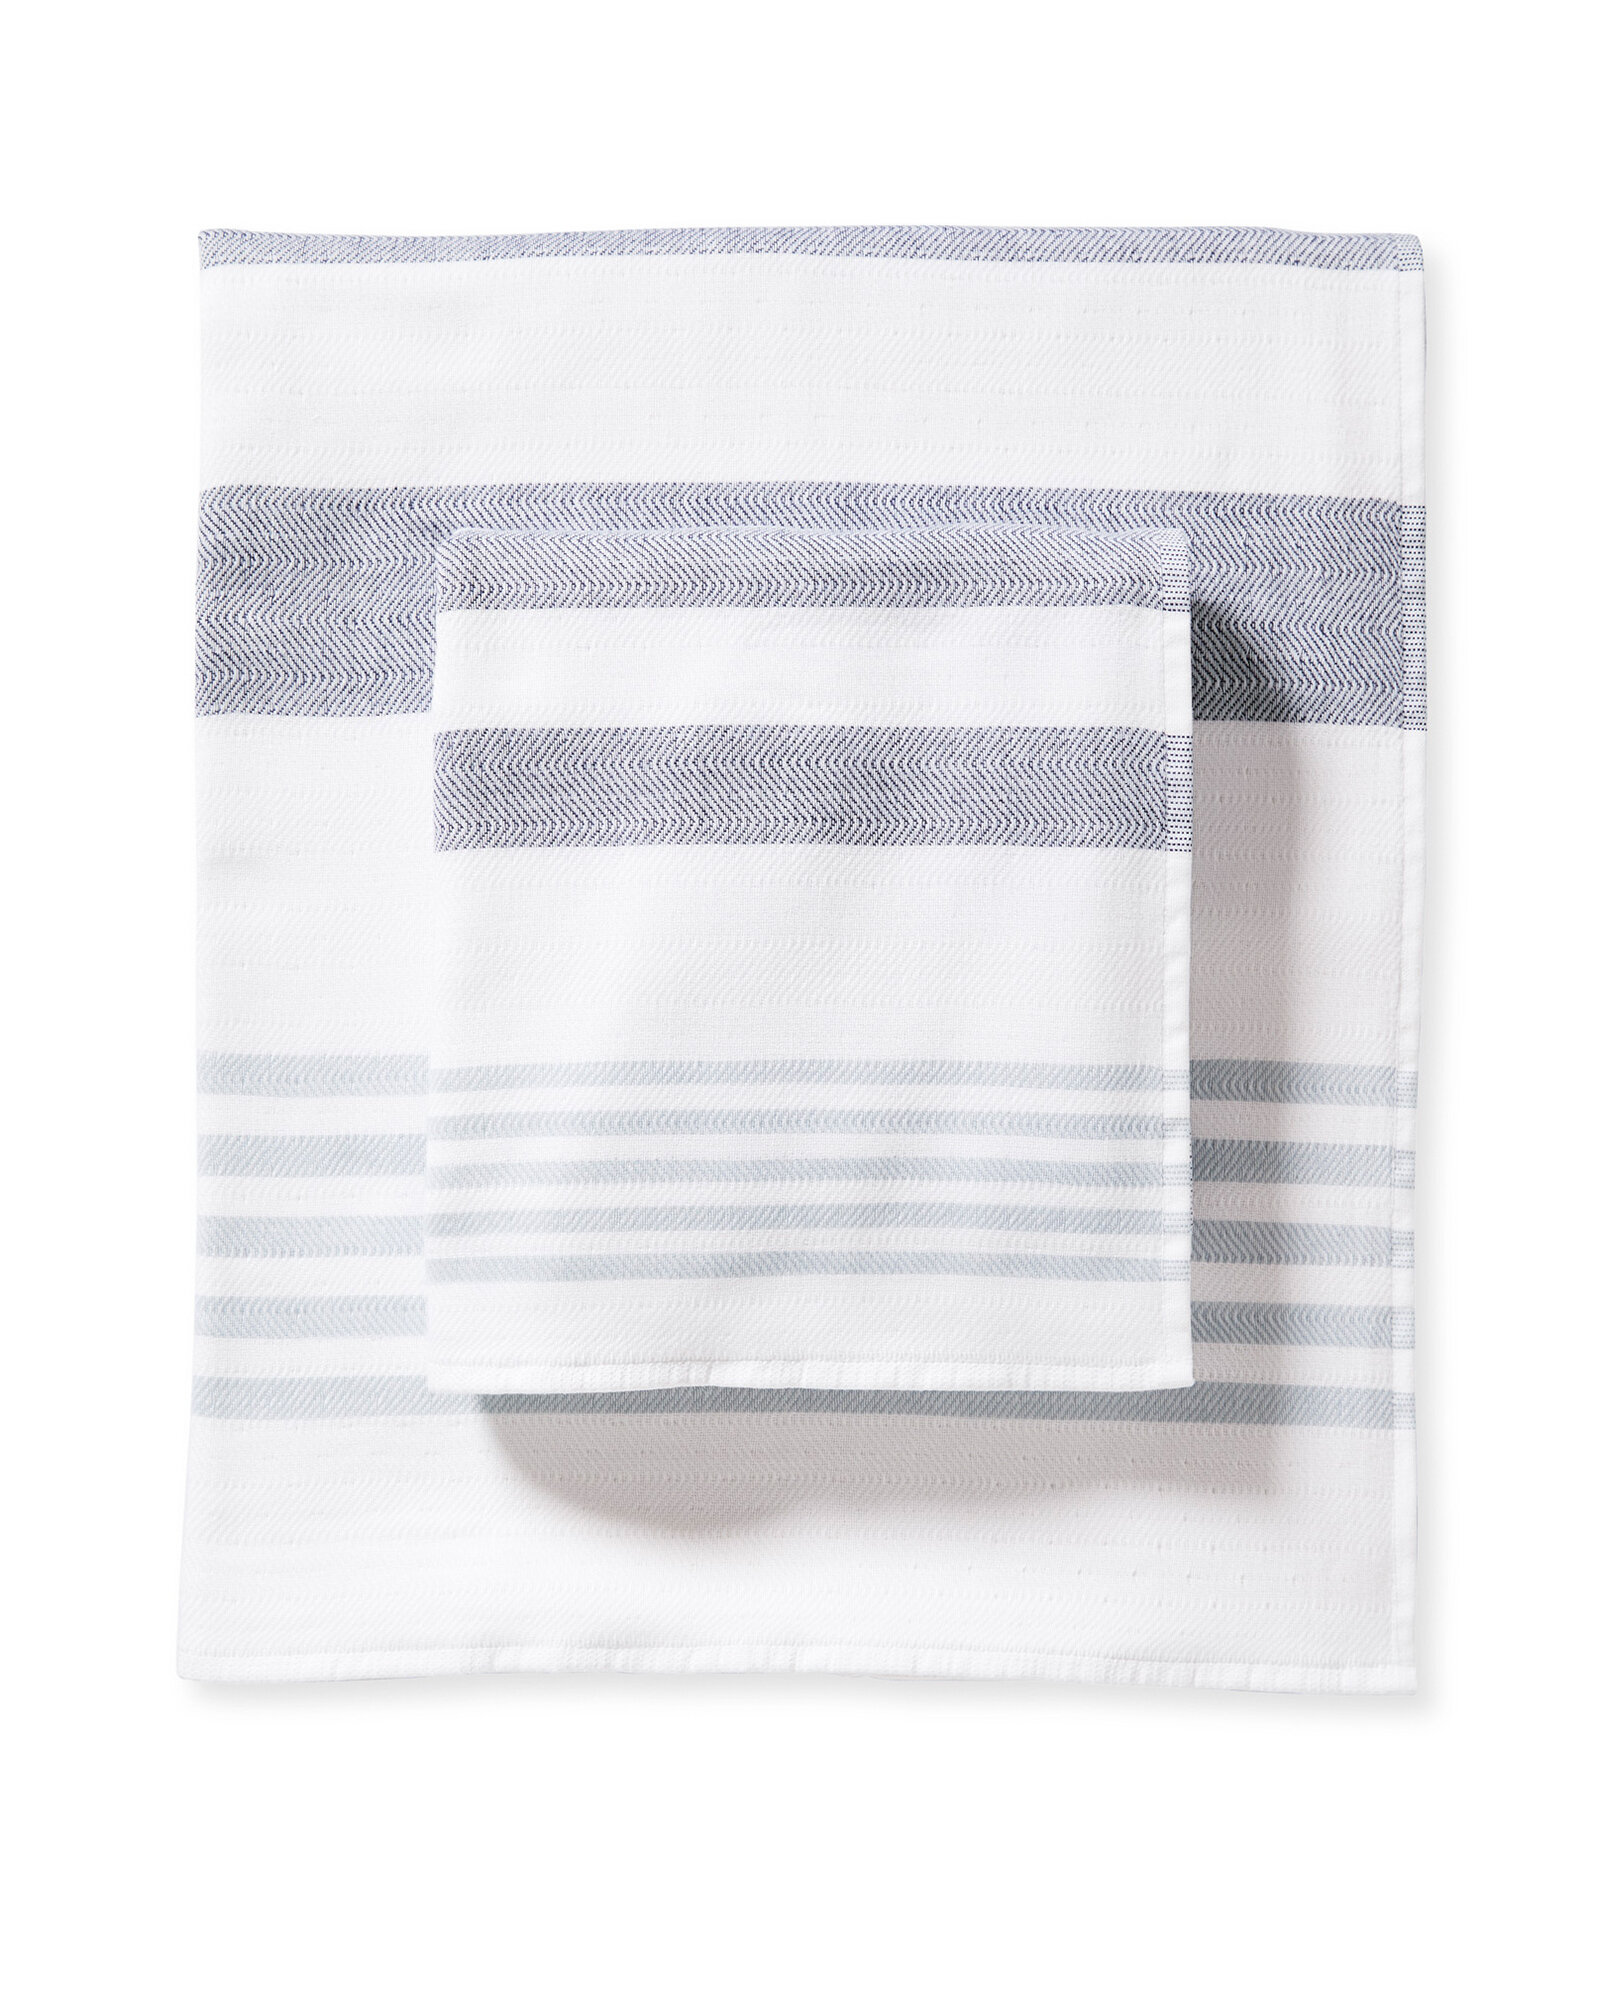 Fouta Bath Collection - Serena and Lily.jpeg